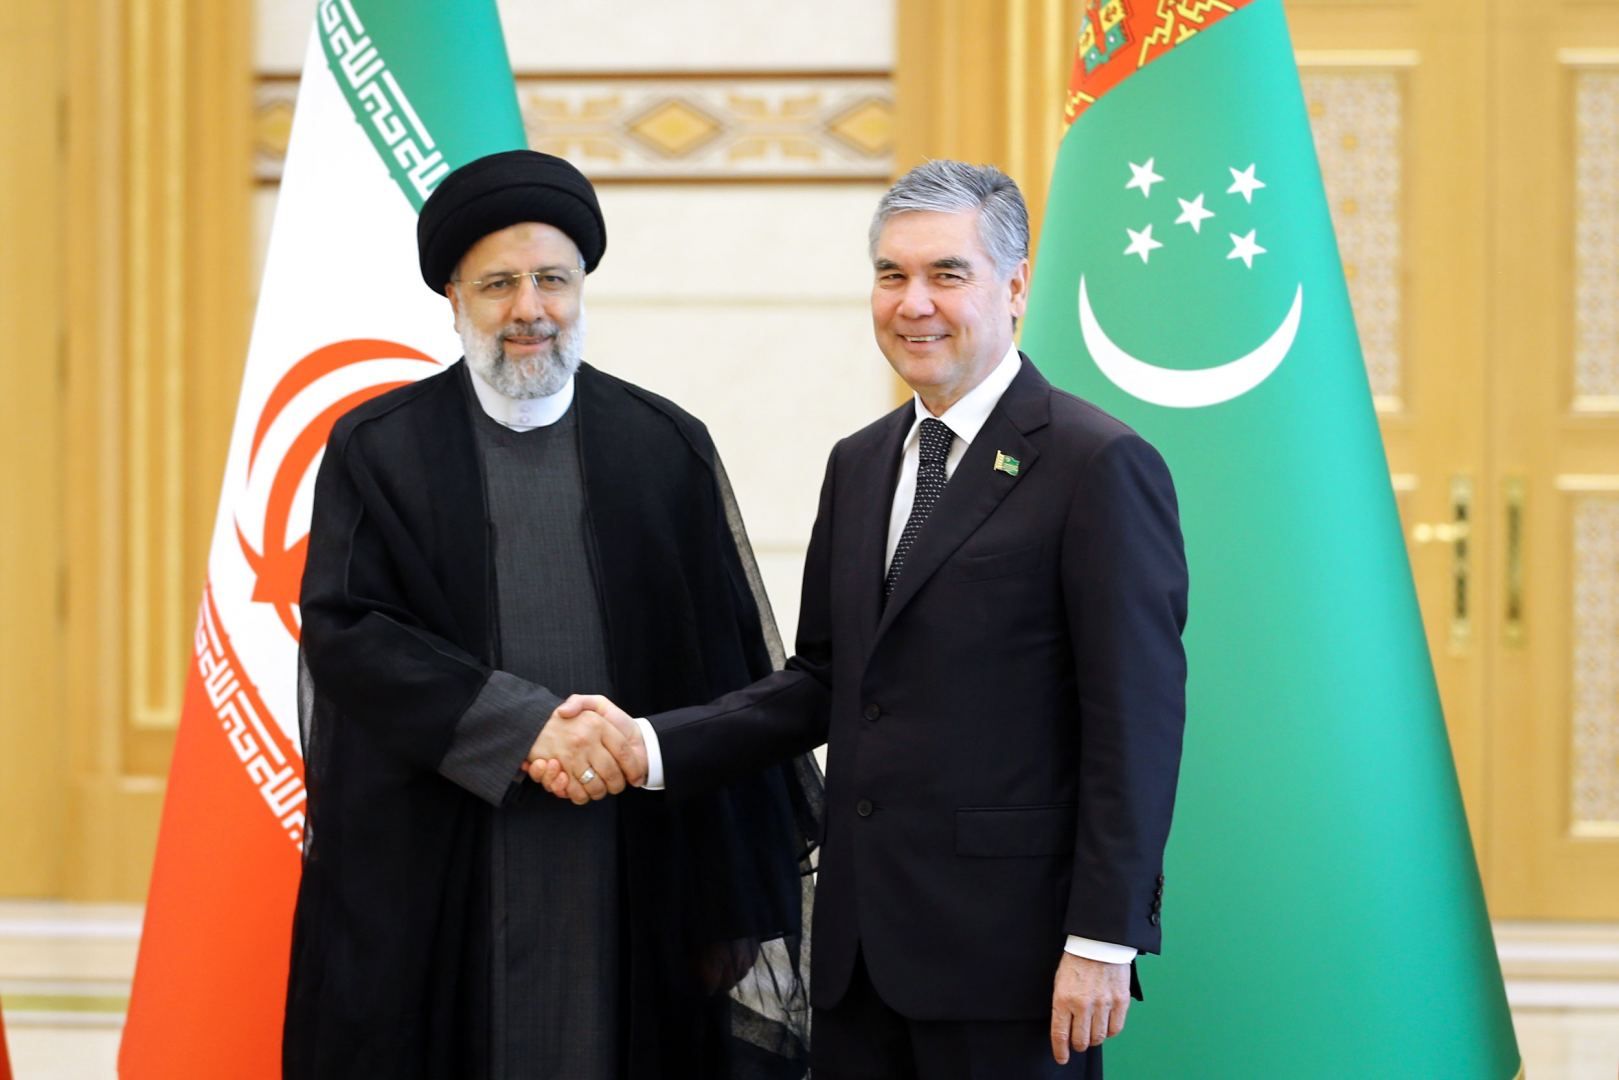 Iran-Turkmenistan relations developing rapidly on basis of mutual trust - President Raisi